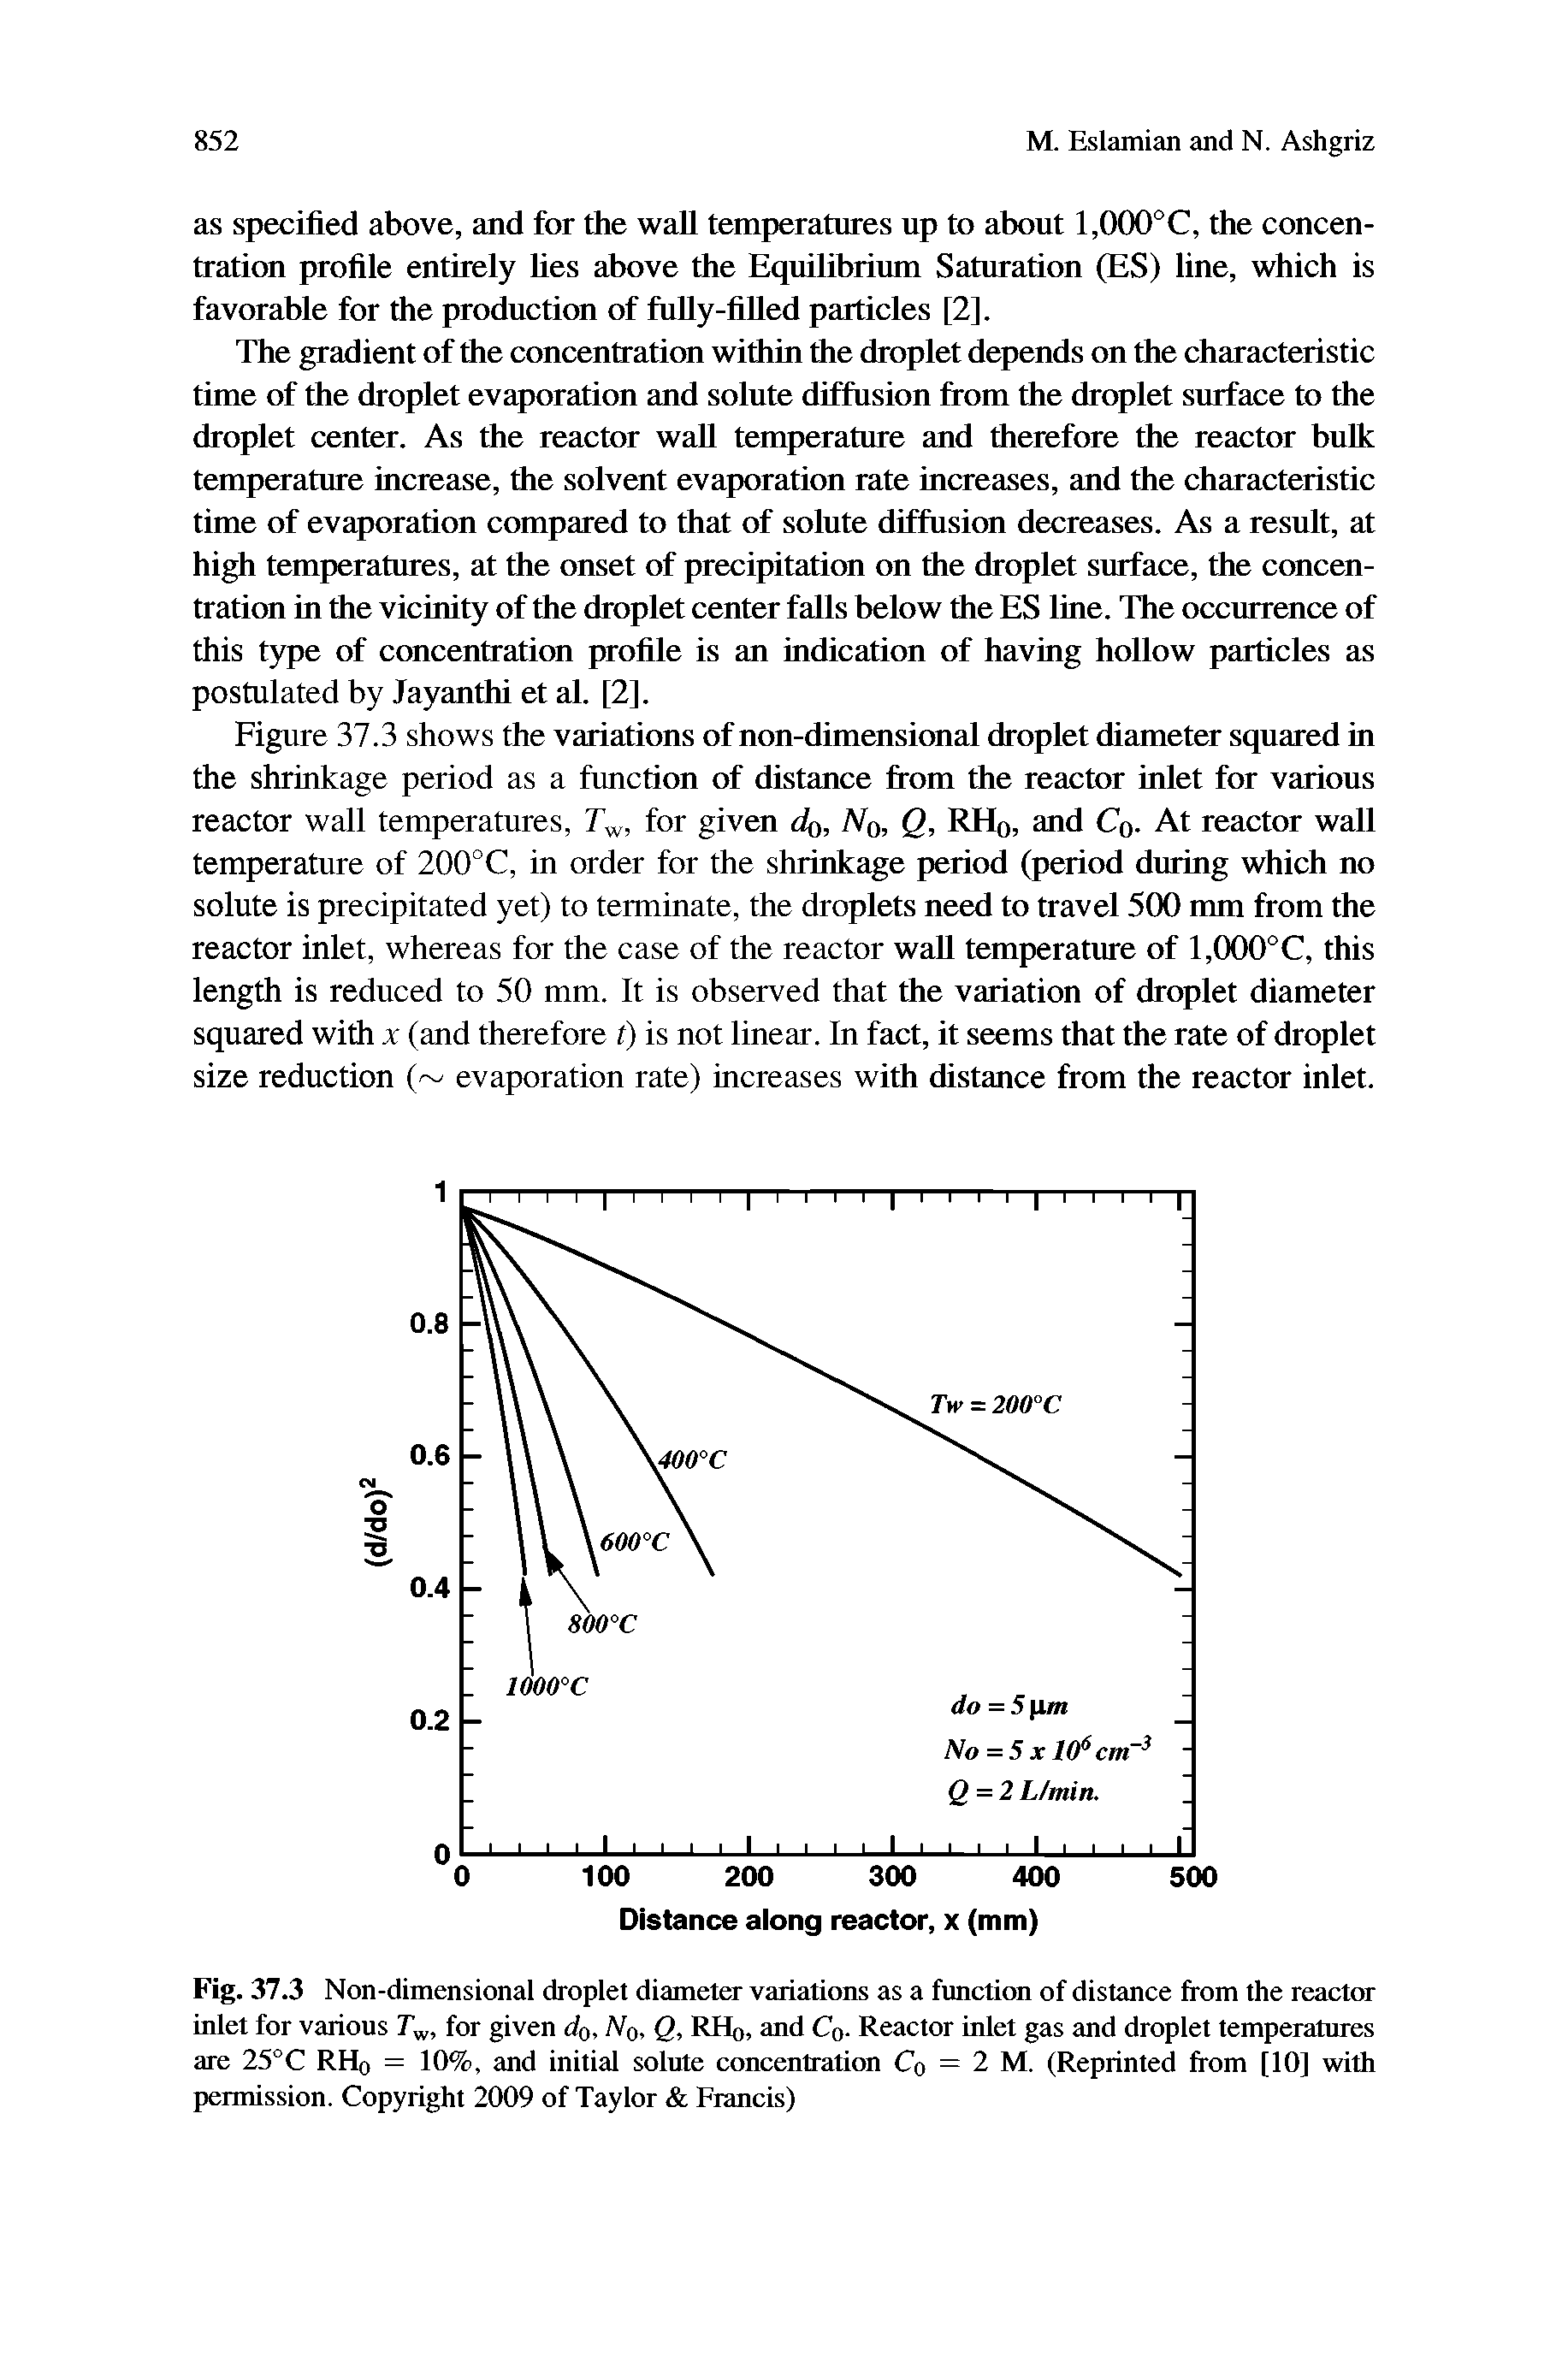 Fig. 37.3 Non-dimensional droplet diameter variations as a function of distance from the reactor inlet for various T, for given do. No, Q, RHo, and Co- Reactor inlet gas and droplet temperatures are 25°C RHq = 10%, and initial solute concentration Co = 2 M. (Reprinted from [10] with permission. Copyright 2009 of Taylor Francis)...